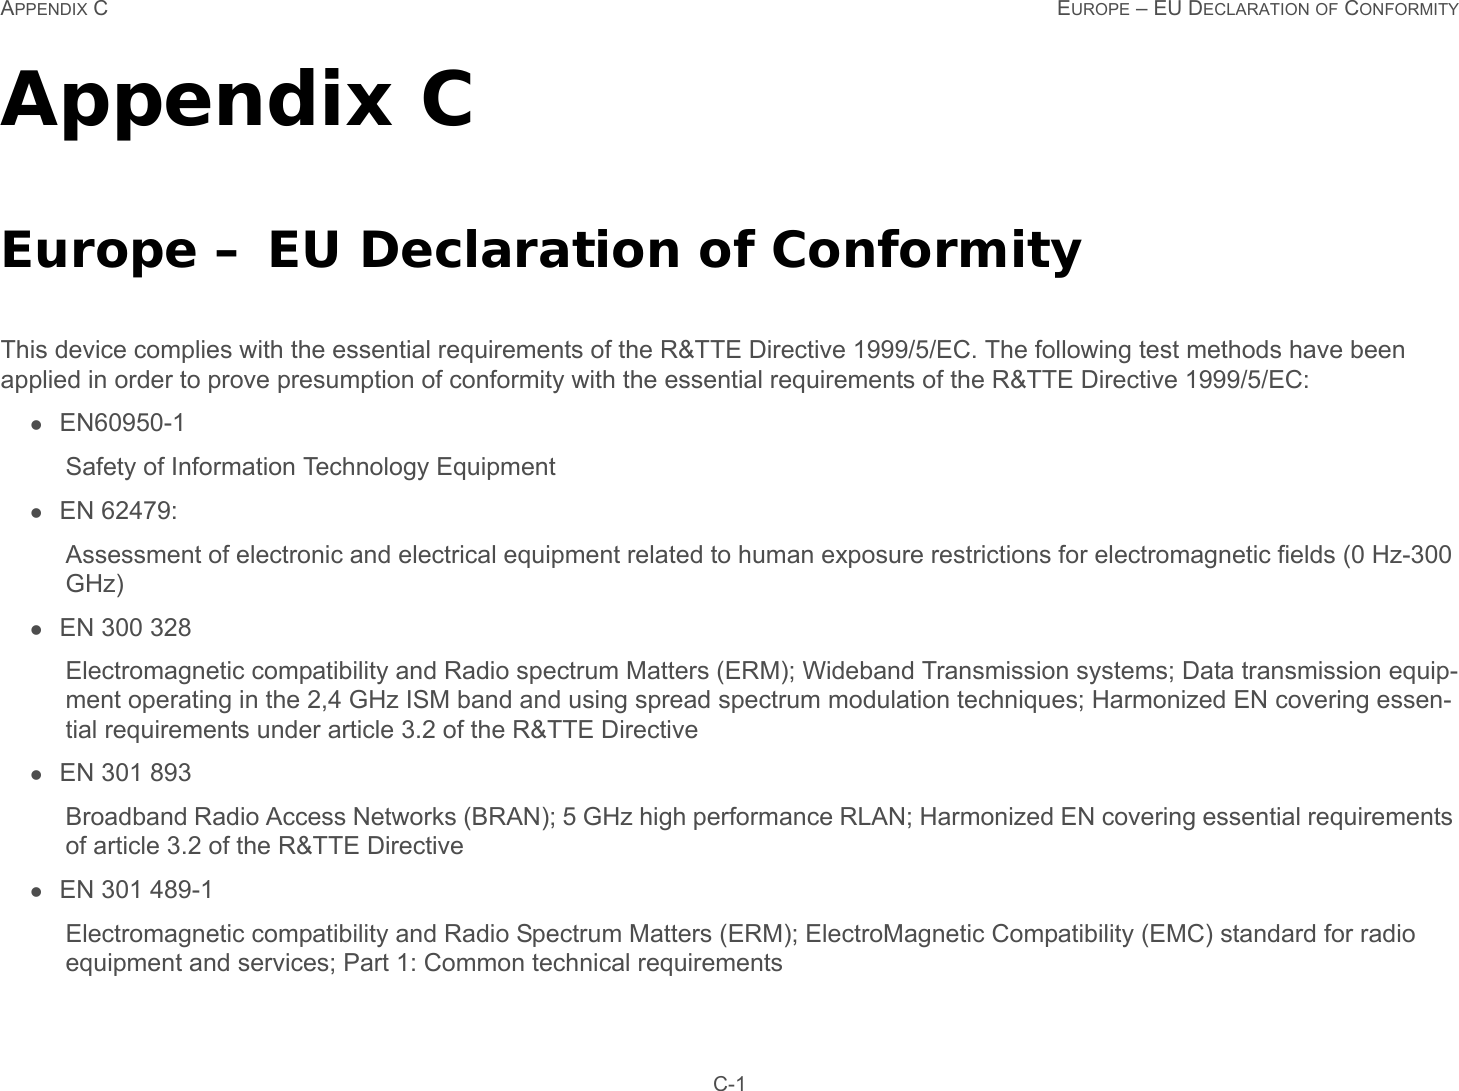 APPENDIX C EUROPE – EU DECLARATION OF CONFORMITY C-1Appendix CEurope – EU Declaration of ConformityThis device complies with the essential requirements of the R&amp;TTE Directive 1999/5/EC. The following test methods have been applied in order to prove presumption of conformity with the essential requirements of the R&amp;TTE Directive 1999/5/EC:EN60950-1Safety of Information Technology EquipmentEN 62479: Assessment of electronic and electrical equipment related to human exposure restrictions for electromagnetic fields (0 Hz-300 GHz)EN 300 328Electromagnetic compatibility and Radio spectrum Matters (ERM); Wideband Transmission systems; Data transmission equip-ment operating in the 2,4 GHz ISM band and using spread spectrum modulation techniques; Harmonized EN covering essen-tial requirements under article 3.2 of the R&amp;TTE DirectiveEN 301 893 Broadband Radio Access Networks (BRAN); 5 GHz high performance RLAN; Harmonized EN covering essential requirements of article 3.2 of the R&amp;TTE DirectiveEN 301 489-1 Electromagnetic compatibility and Radio Spectrum Matters (ERM); ElectroMagnetic Compatibility (EMC) standard for radio equipment and services; Part 1: Common technical requirements